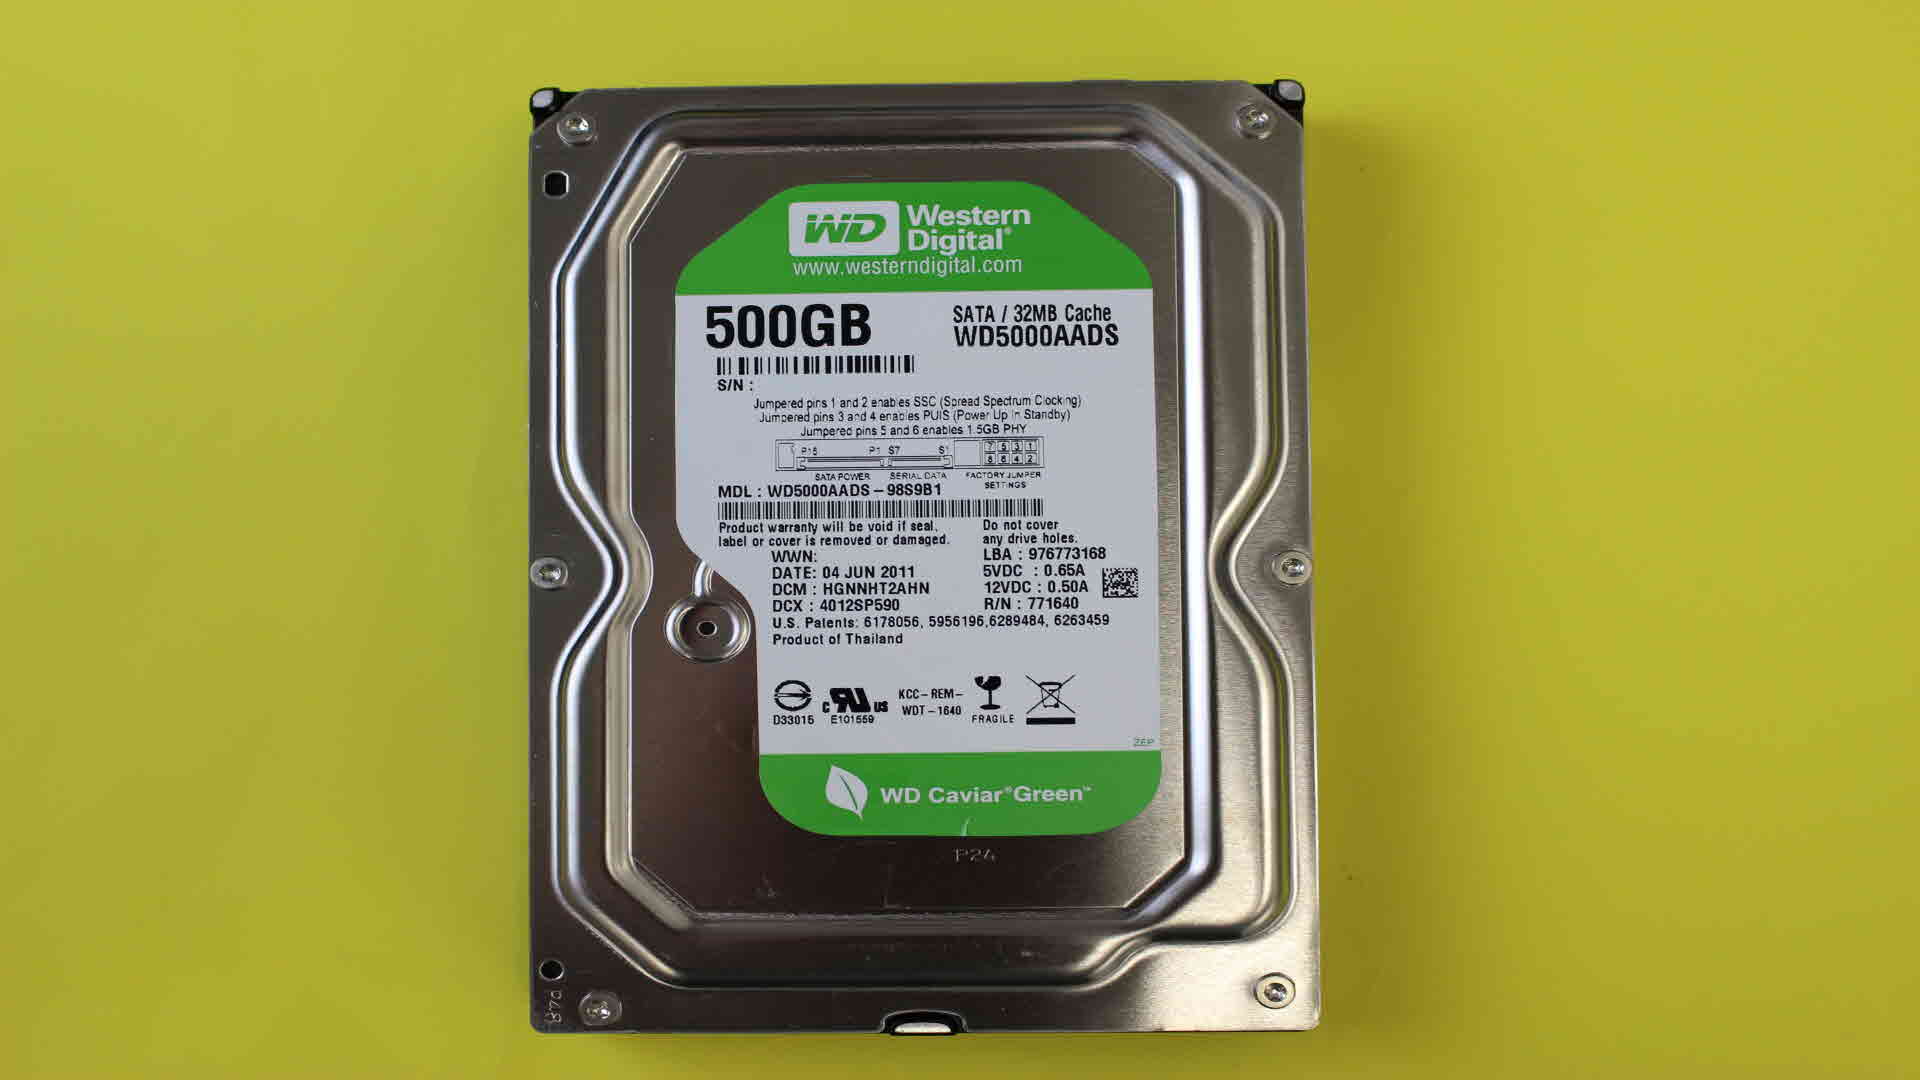 wd5000aads-98s9b1-recovery